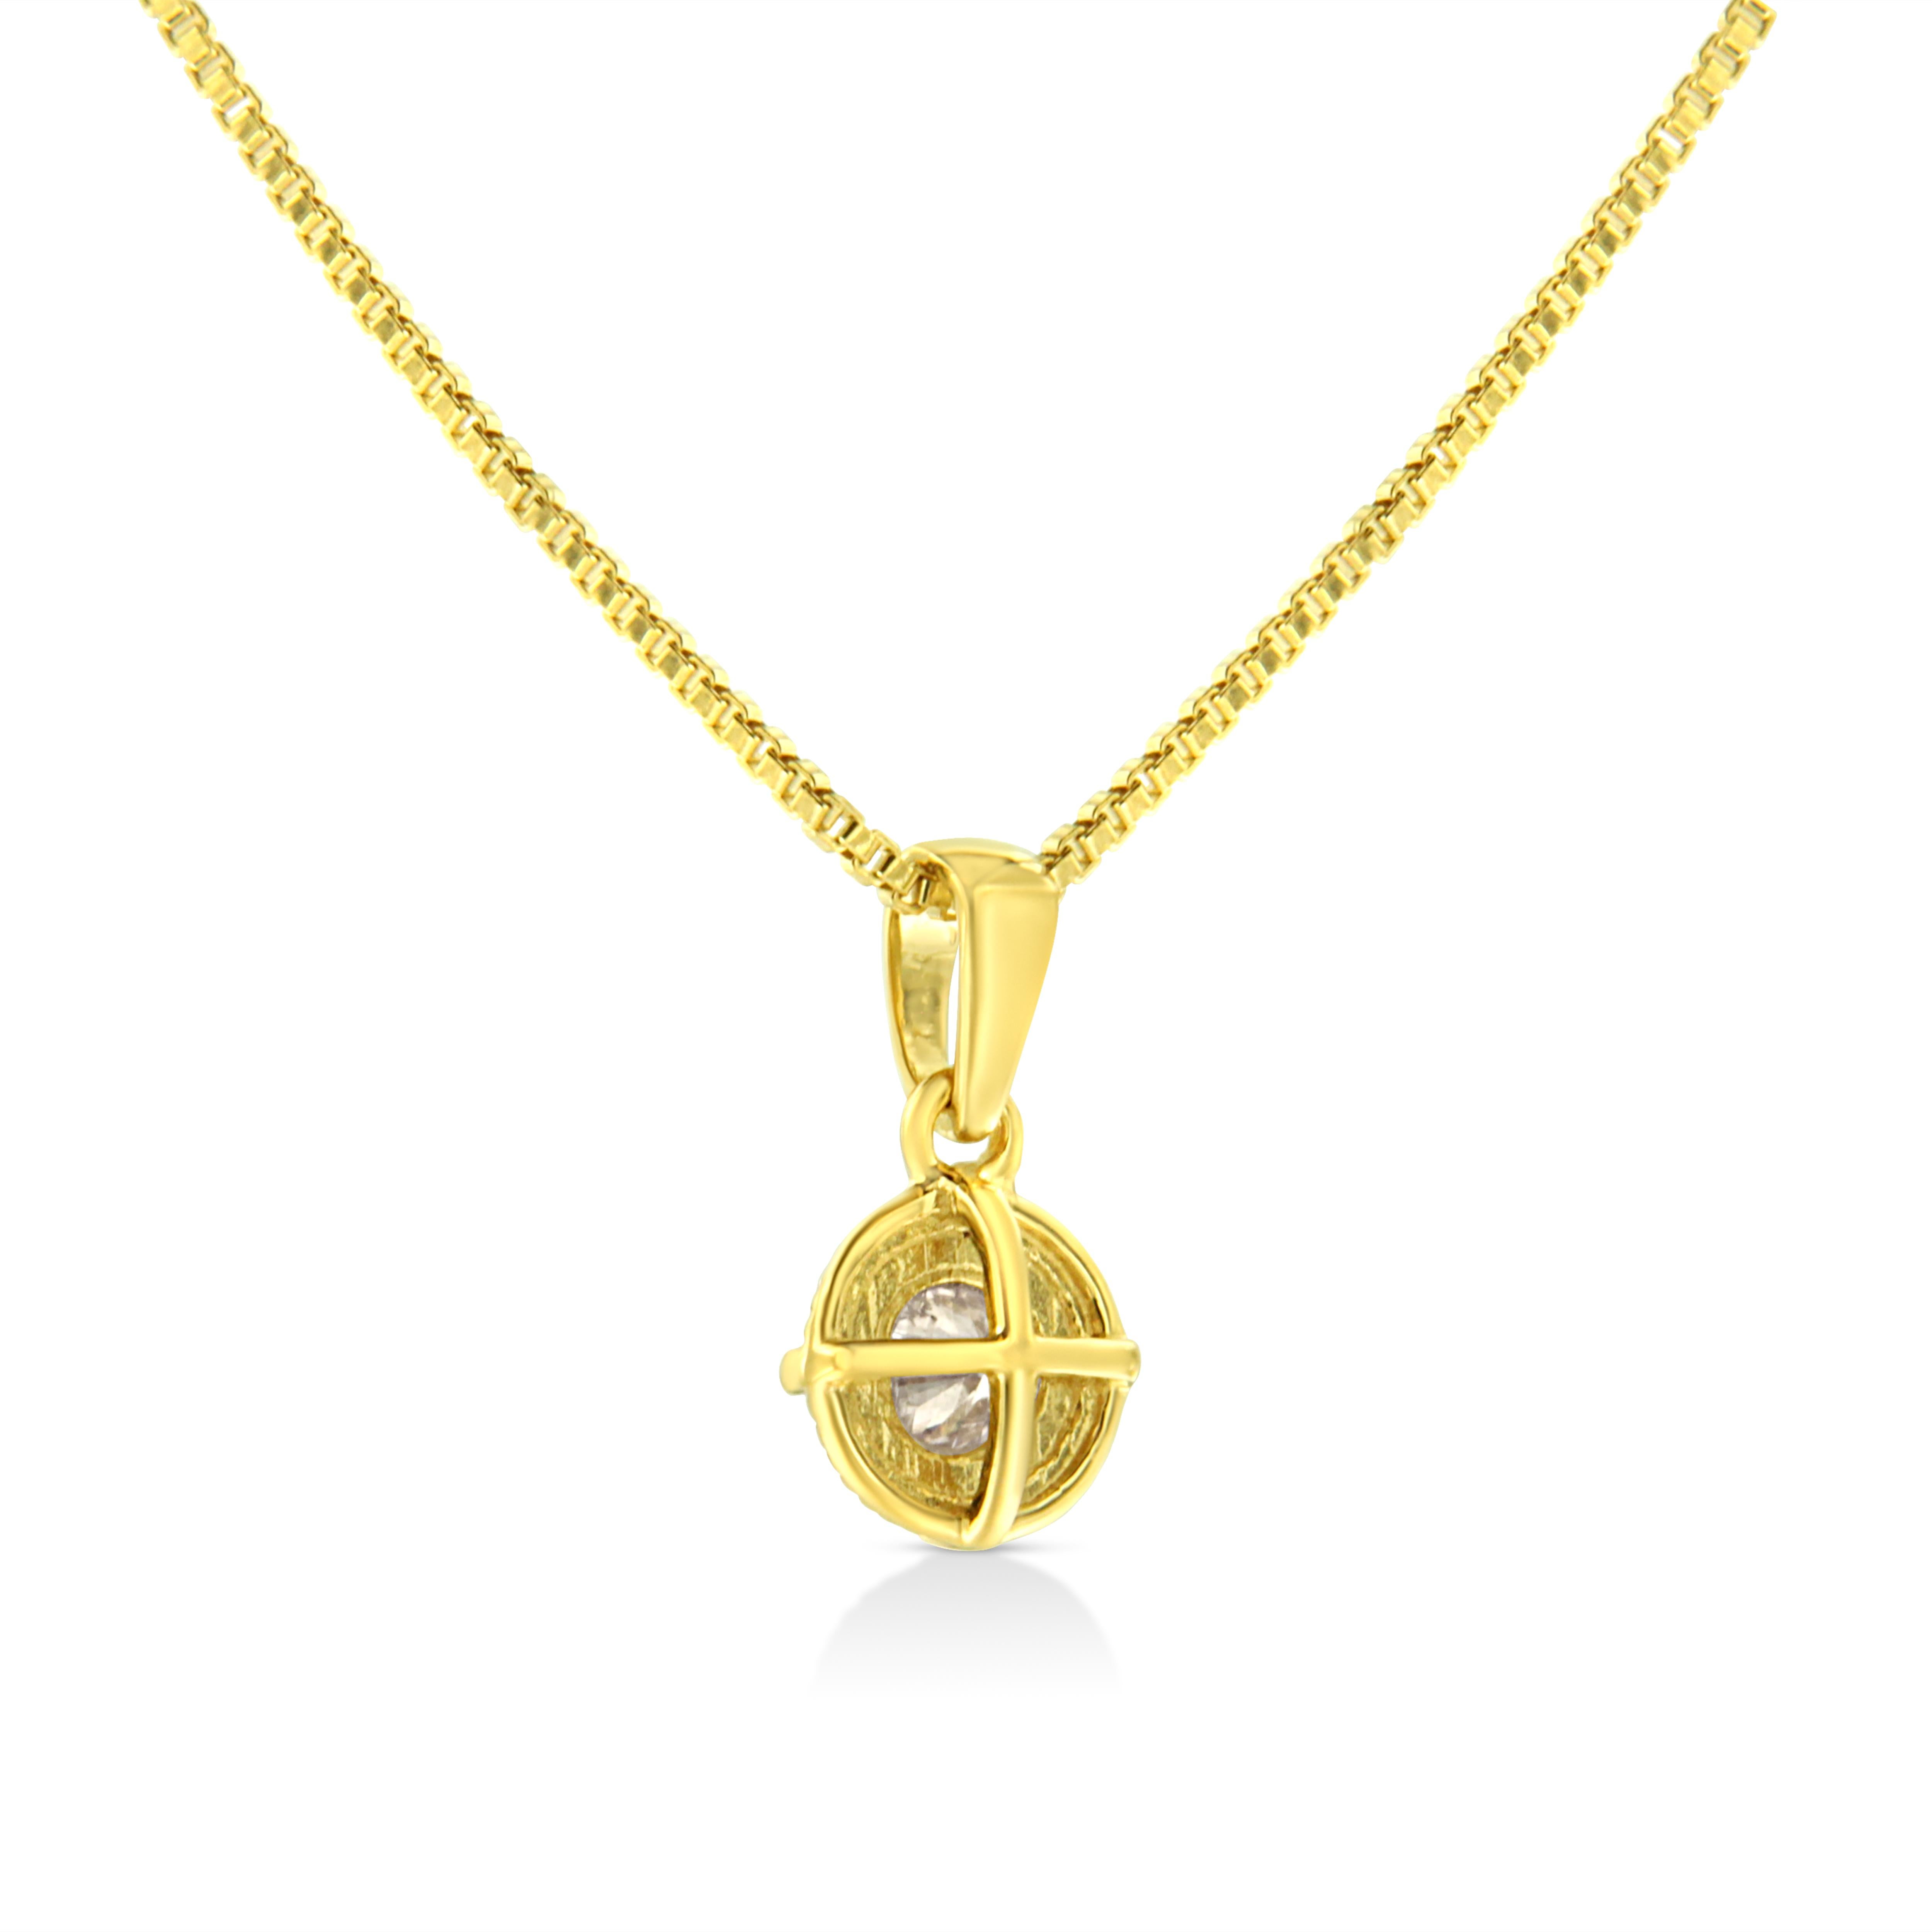 Round Cut Yellow Gold Plated Sterling Silver 3/4 Carat Diamond Solitaire Pendant Necklace For Sale